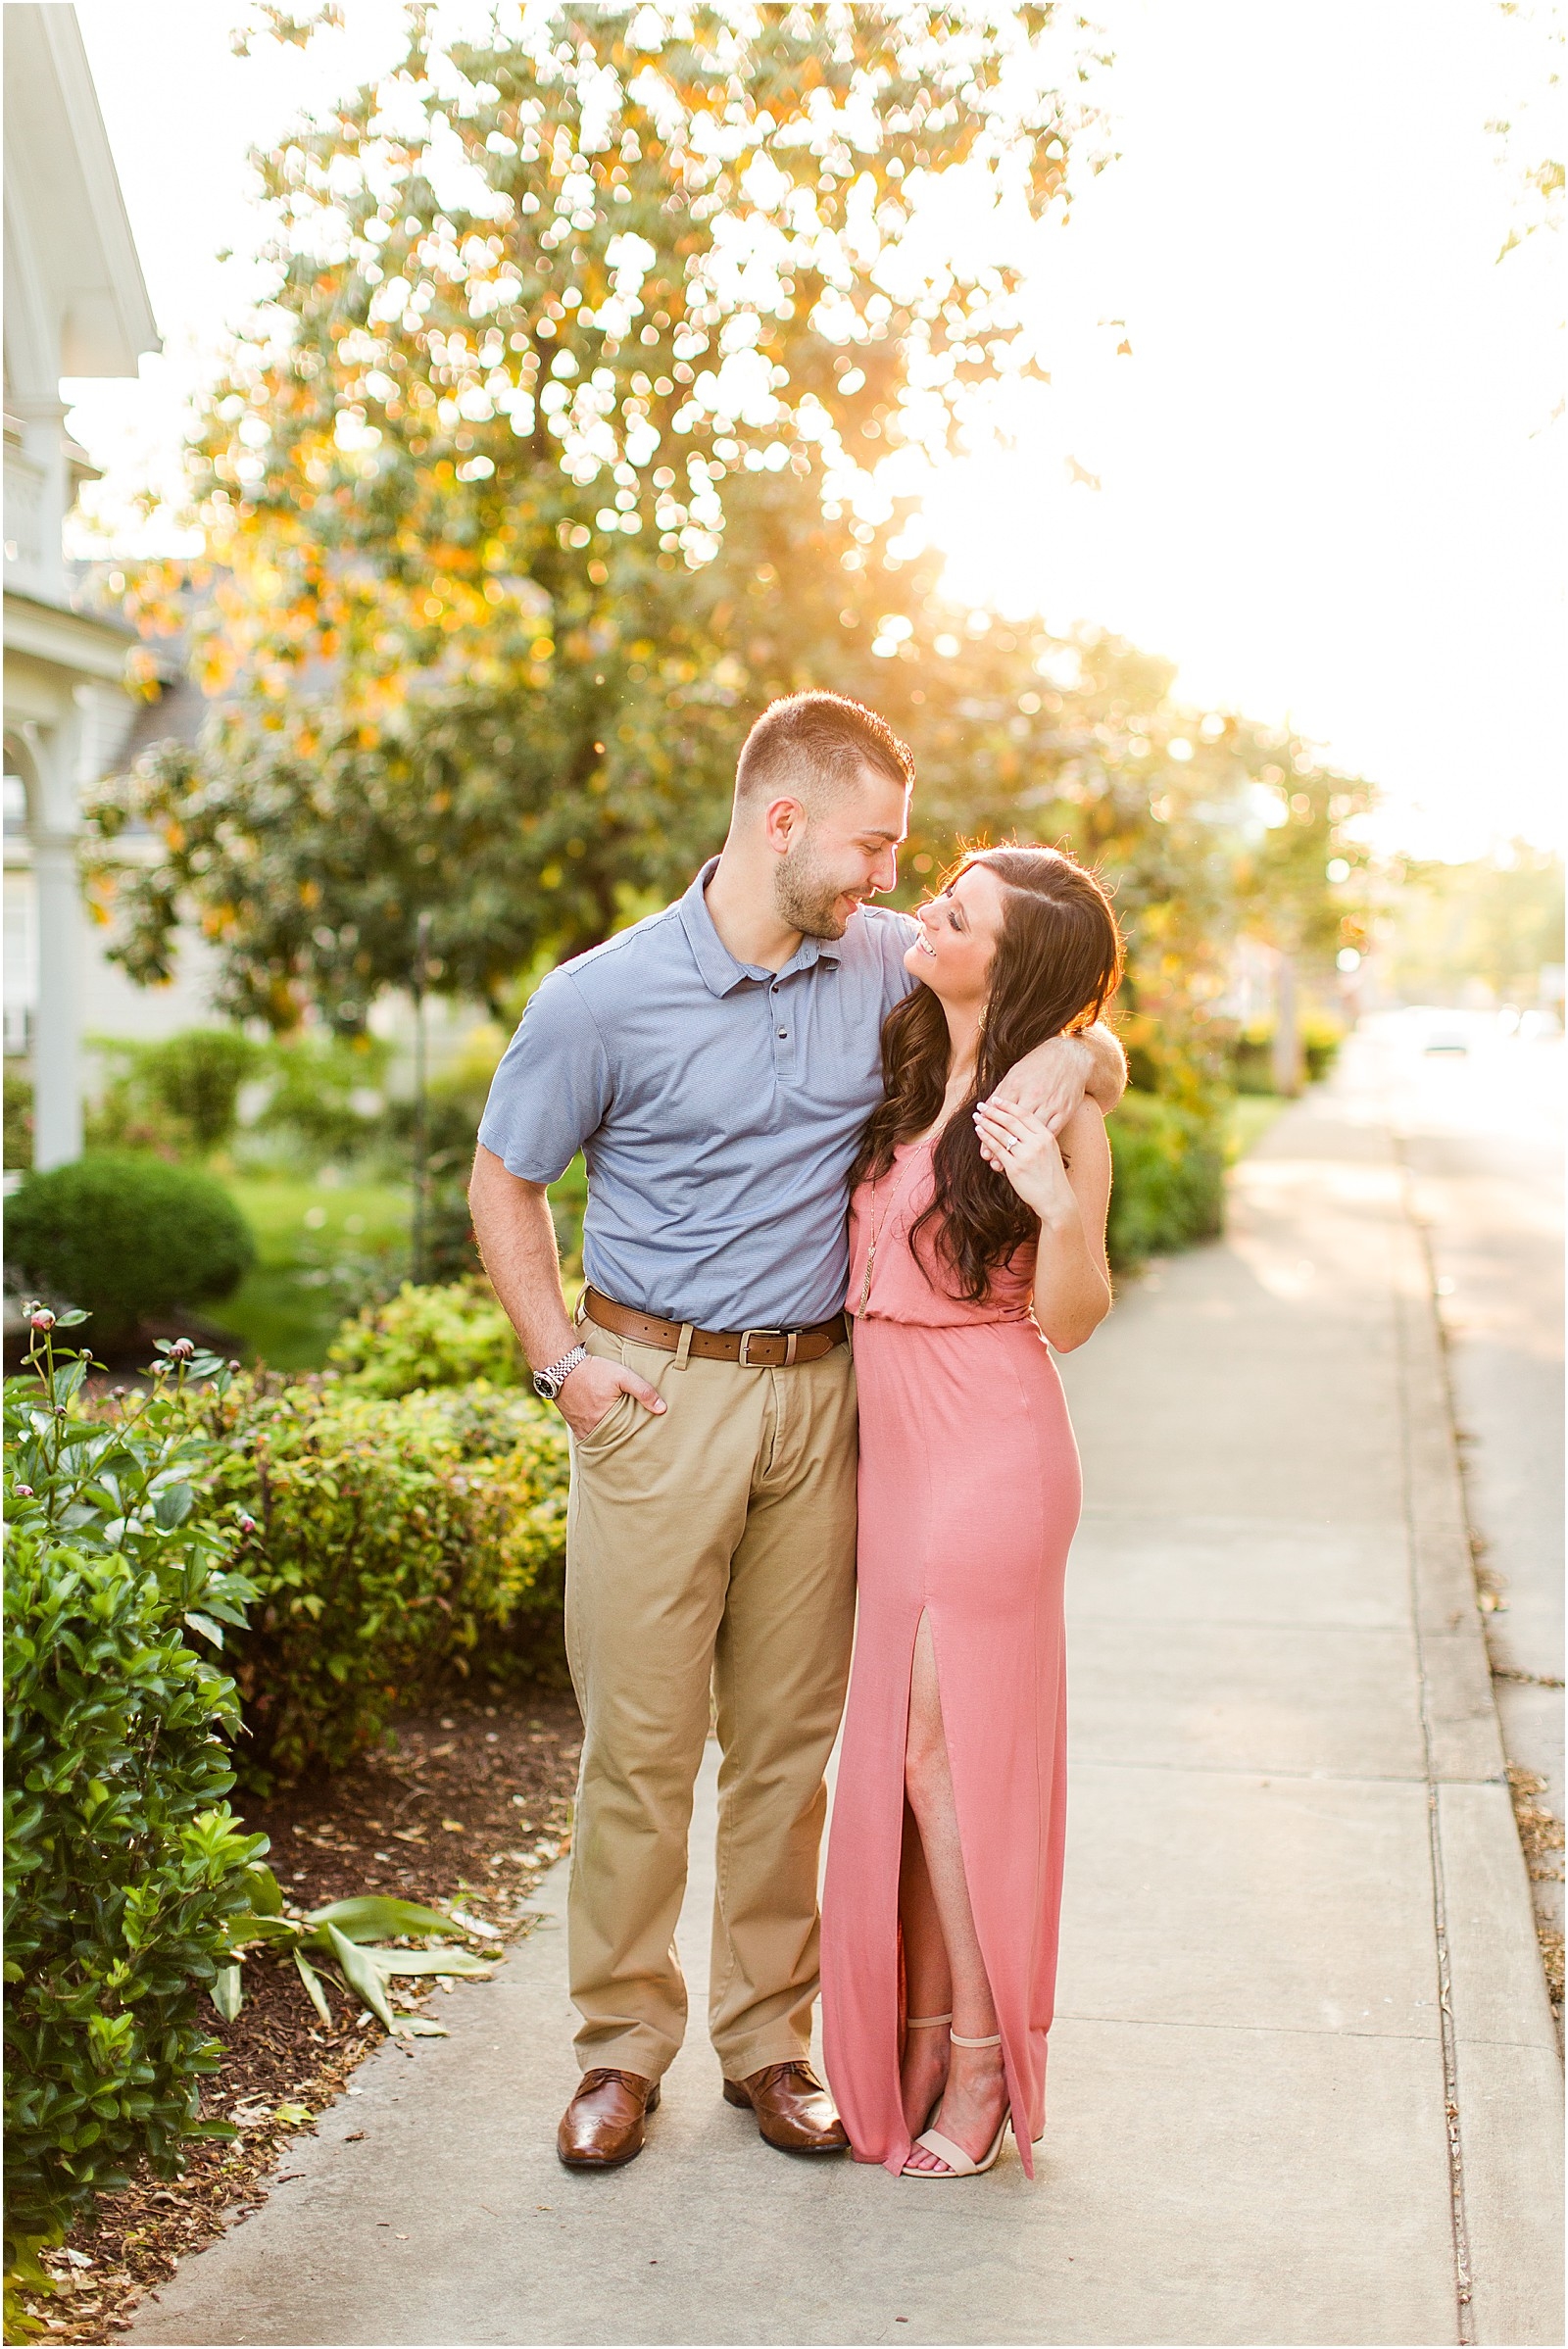 Downtown Newburgh Engagement Session | Matt and Blaire | Bret and Brandie Photography028.jpg